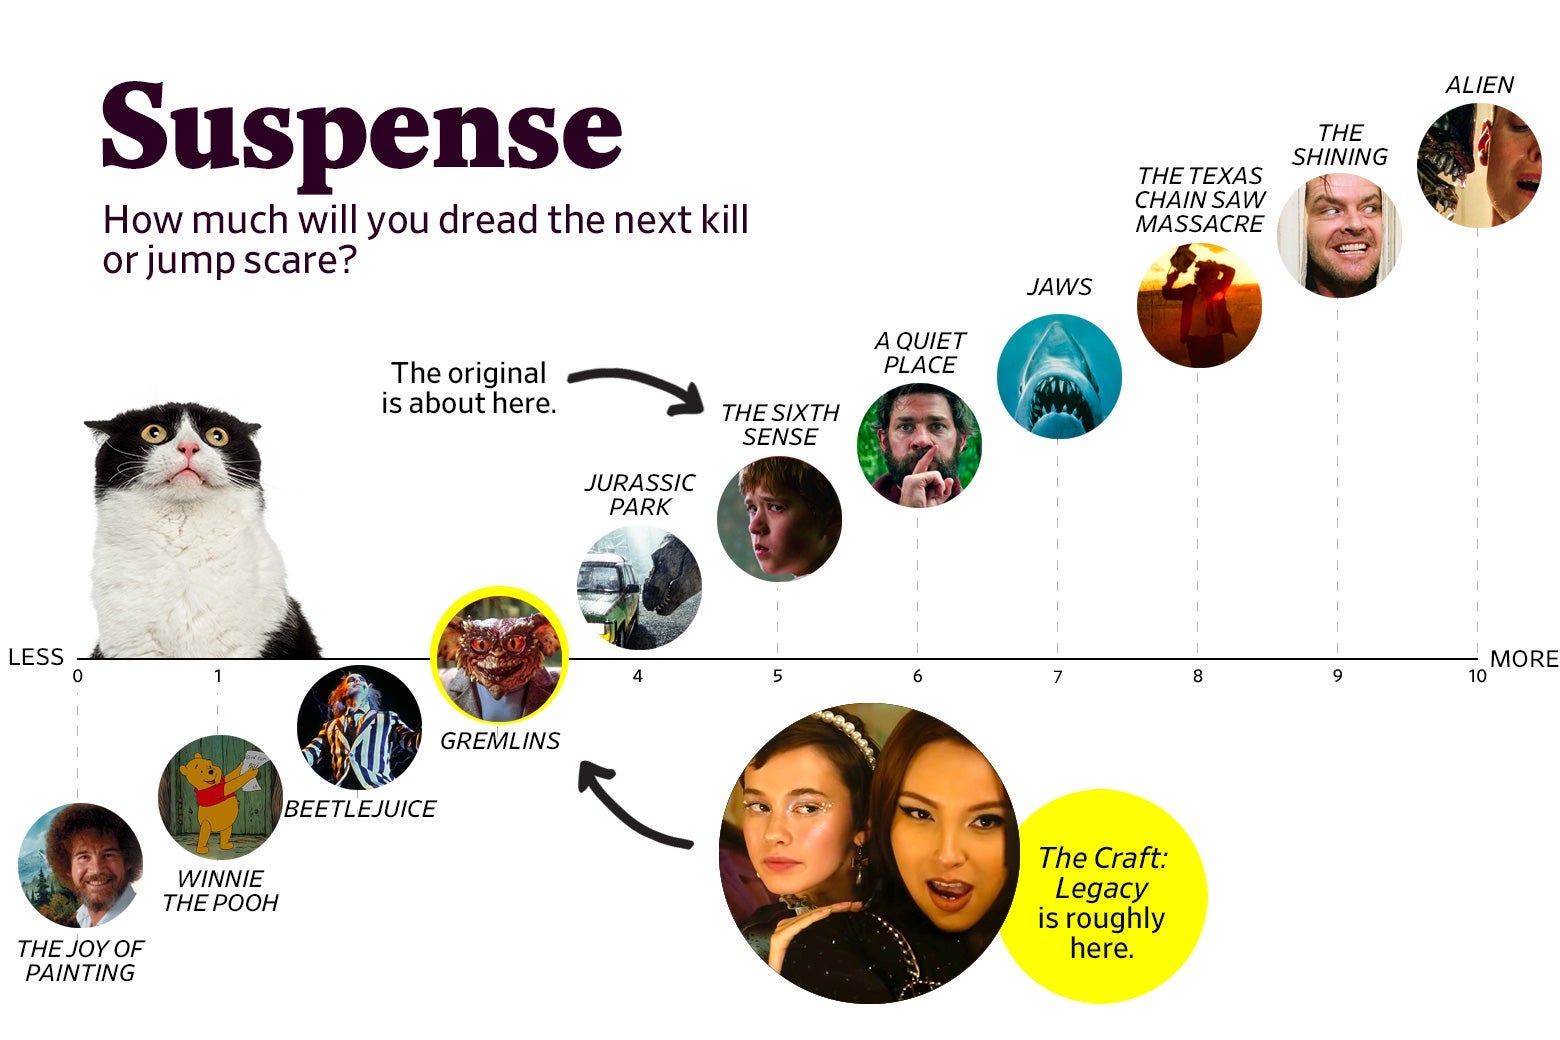 A chart titled “Suspense: How much will you dread the next kill or jump scare?” shows that The Craft: Legacy ranks a 3 in suspense, roughly the same as Gremlins, while the original ranks about a 5, roughly the same as The Sixth Sense. The scale ranges from The Joy of Painting (0) to Alien (10).